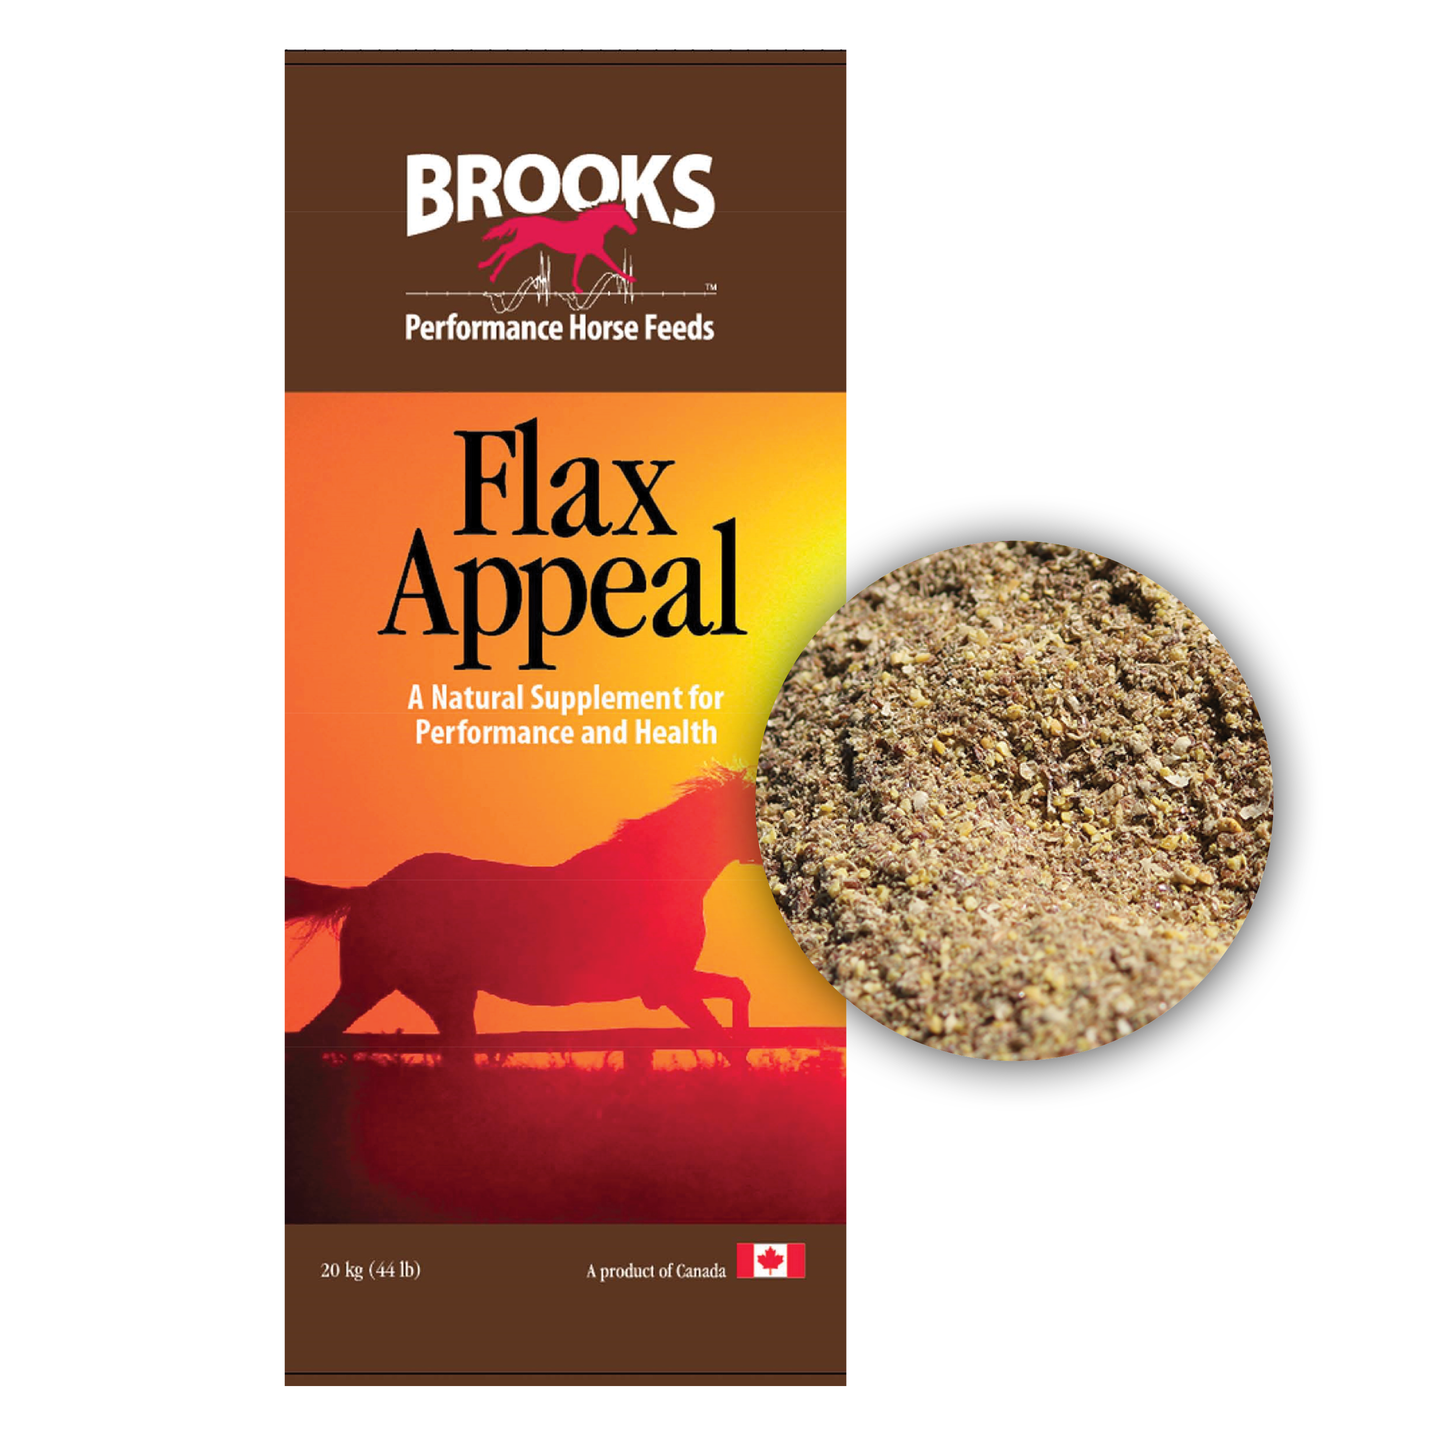 Flax Appeal